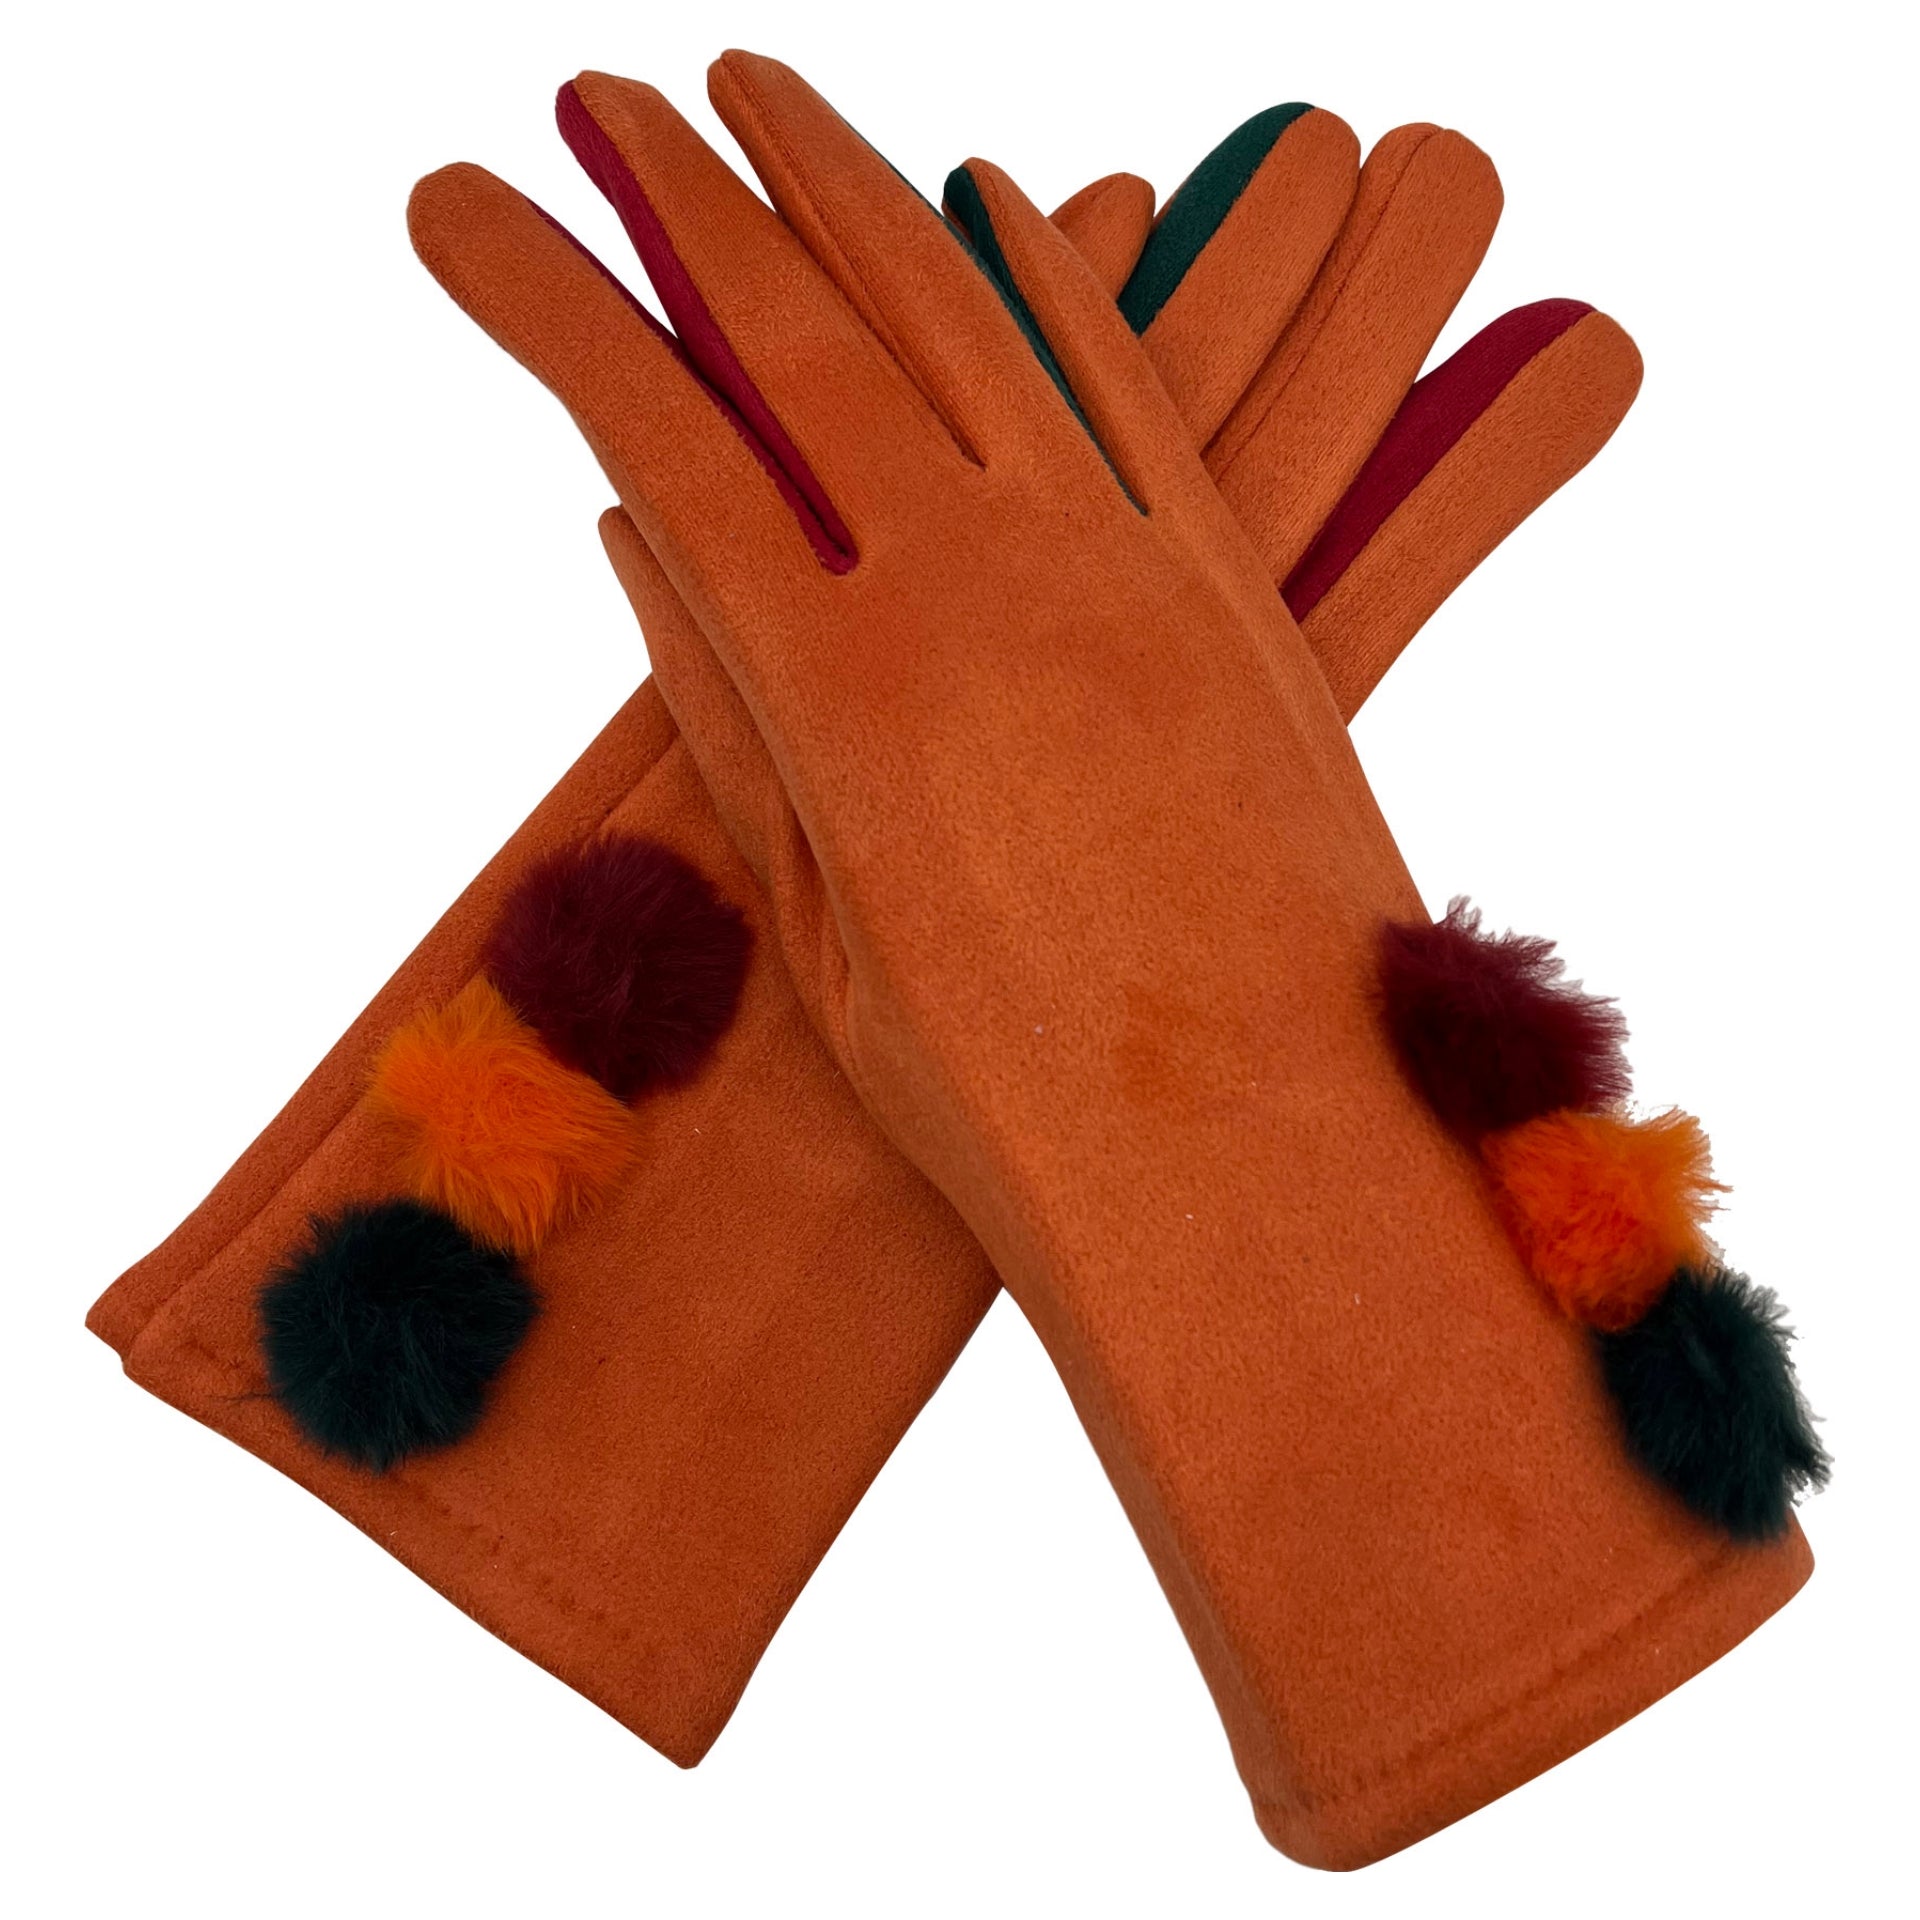 Ladies Soft Synthetic Leather Gloves Walking Driving Winter Warm Fur Lined orange